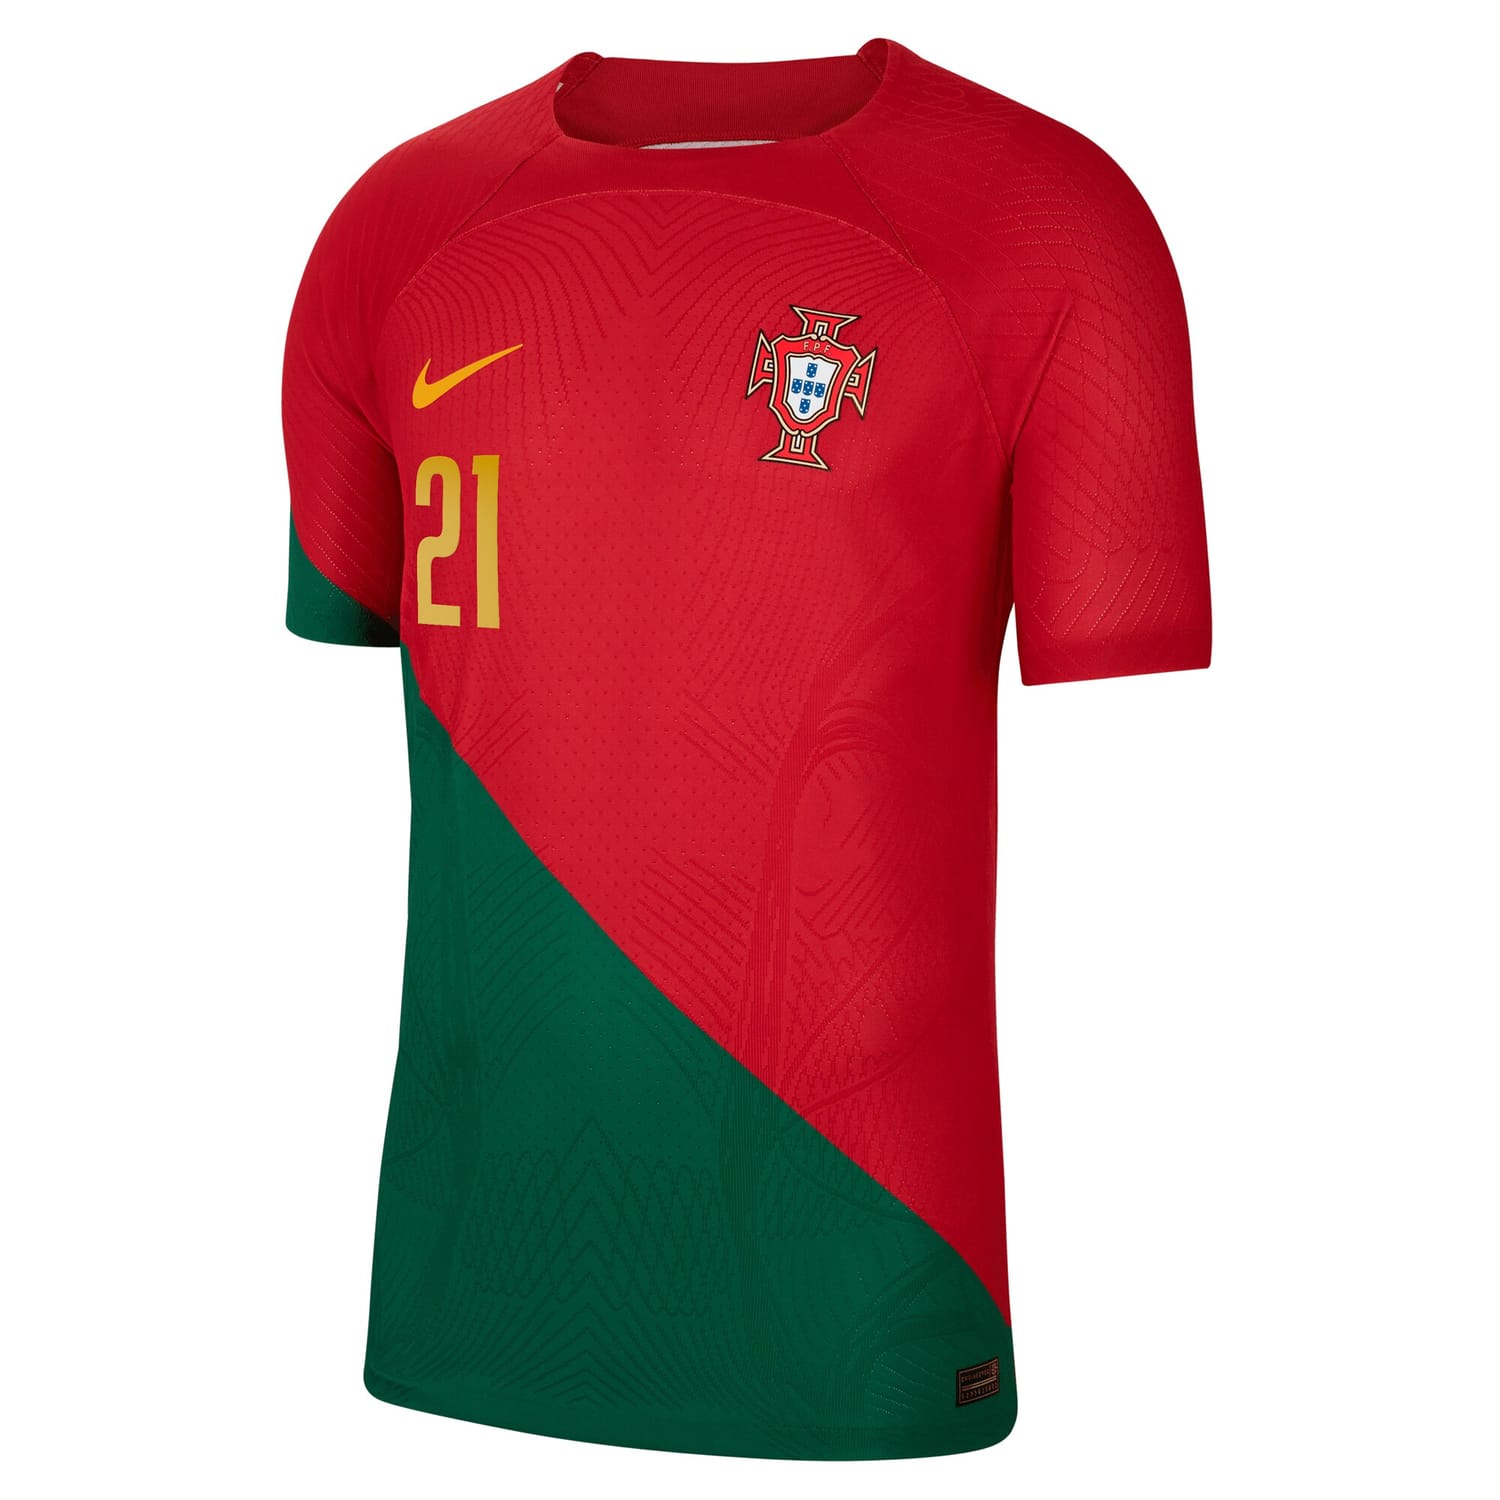 Portugal National Team Home Authentic Jersey Shirt Red 2022-23 player Diogo Jota printing for Men